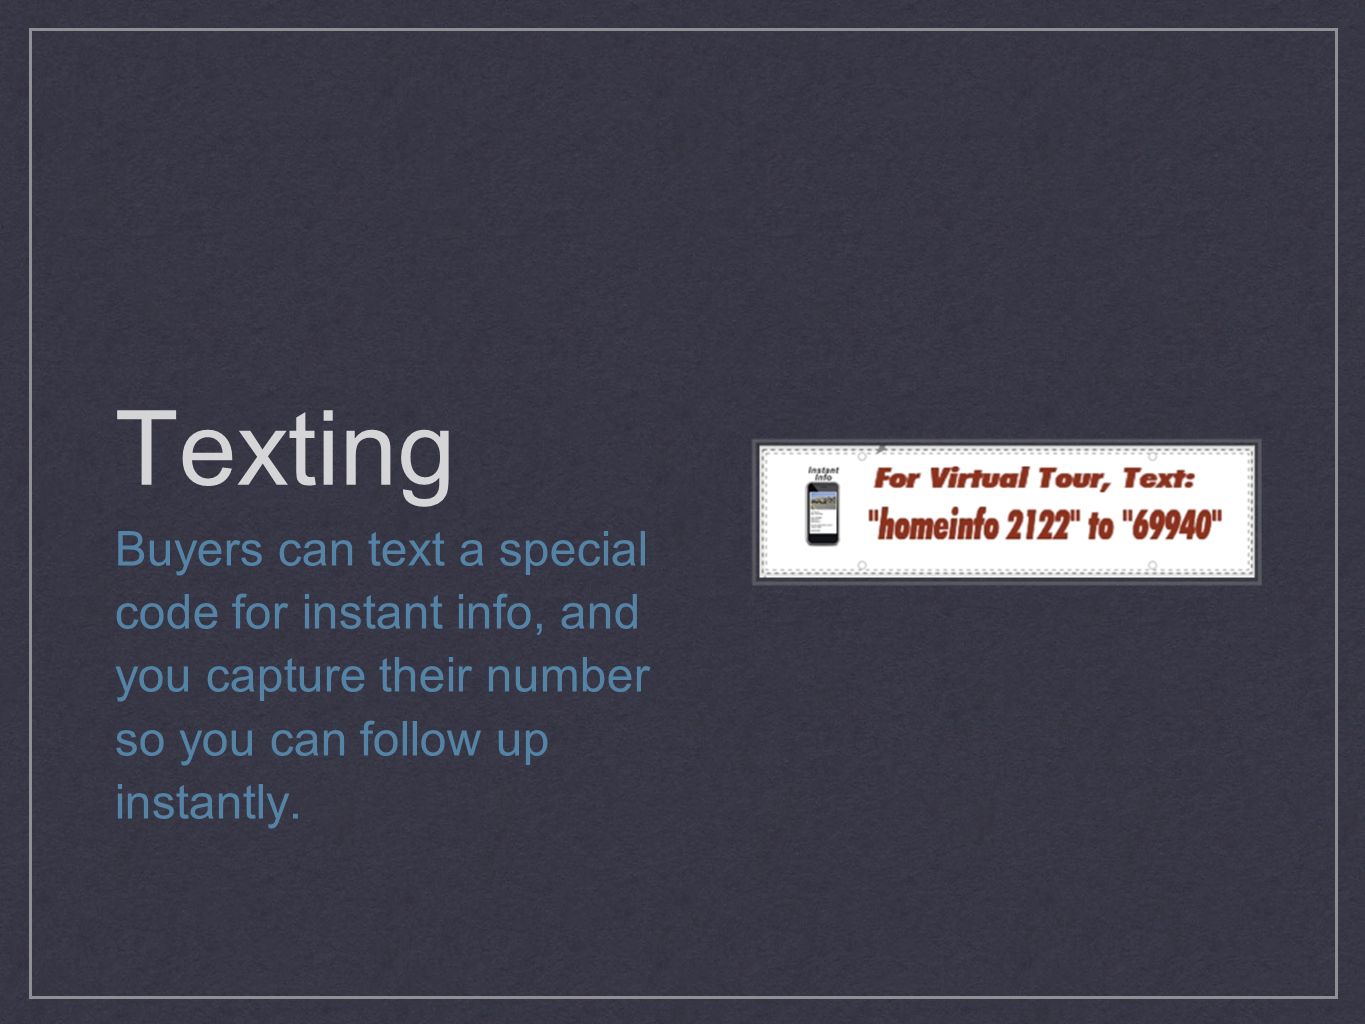 Texting Buyers can text a special code for instant info, and you capture their number so you can follow up instantly.